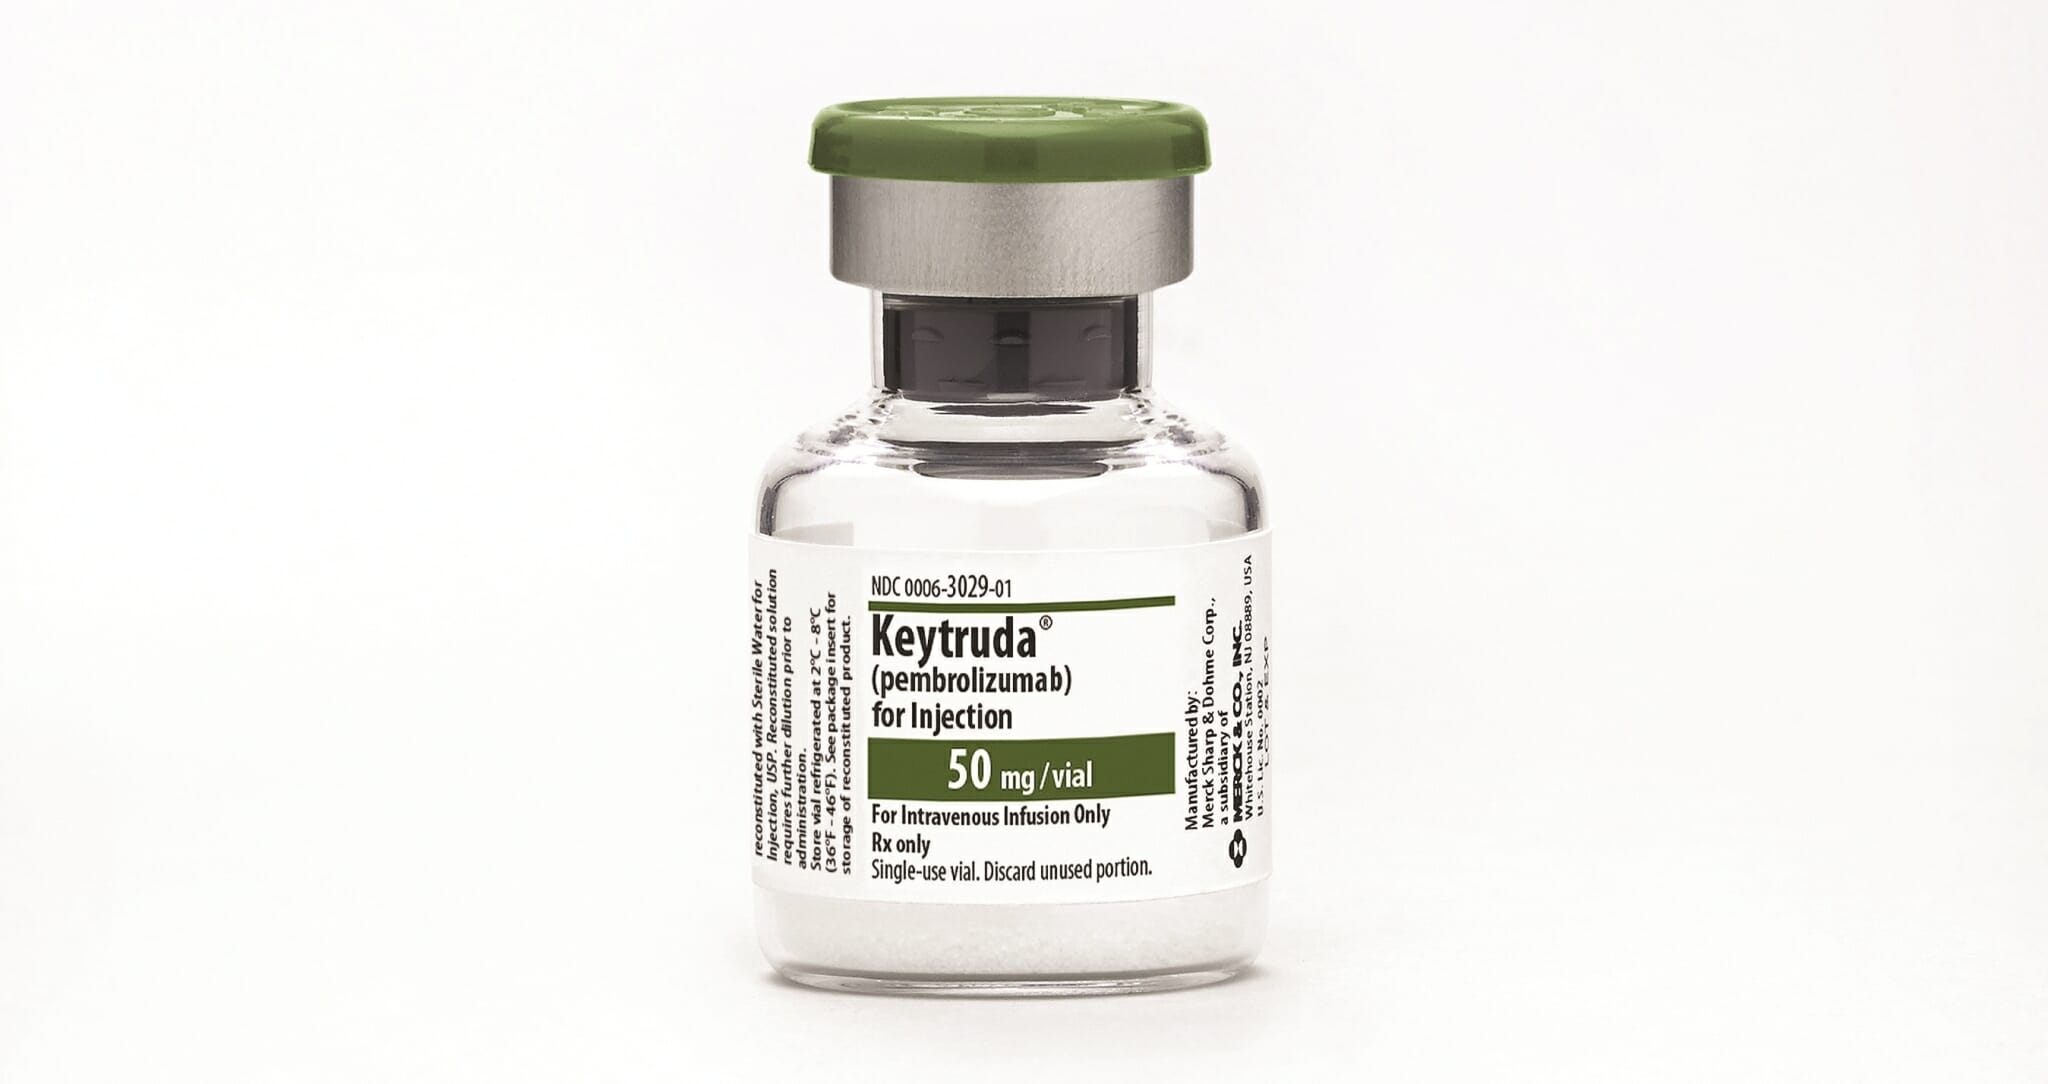 Merck’s Keytruda wins approval in first-line lung cancer